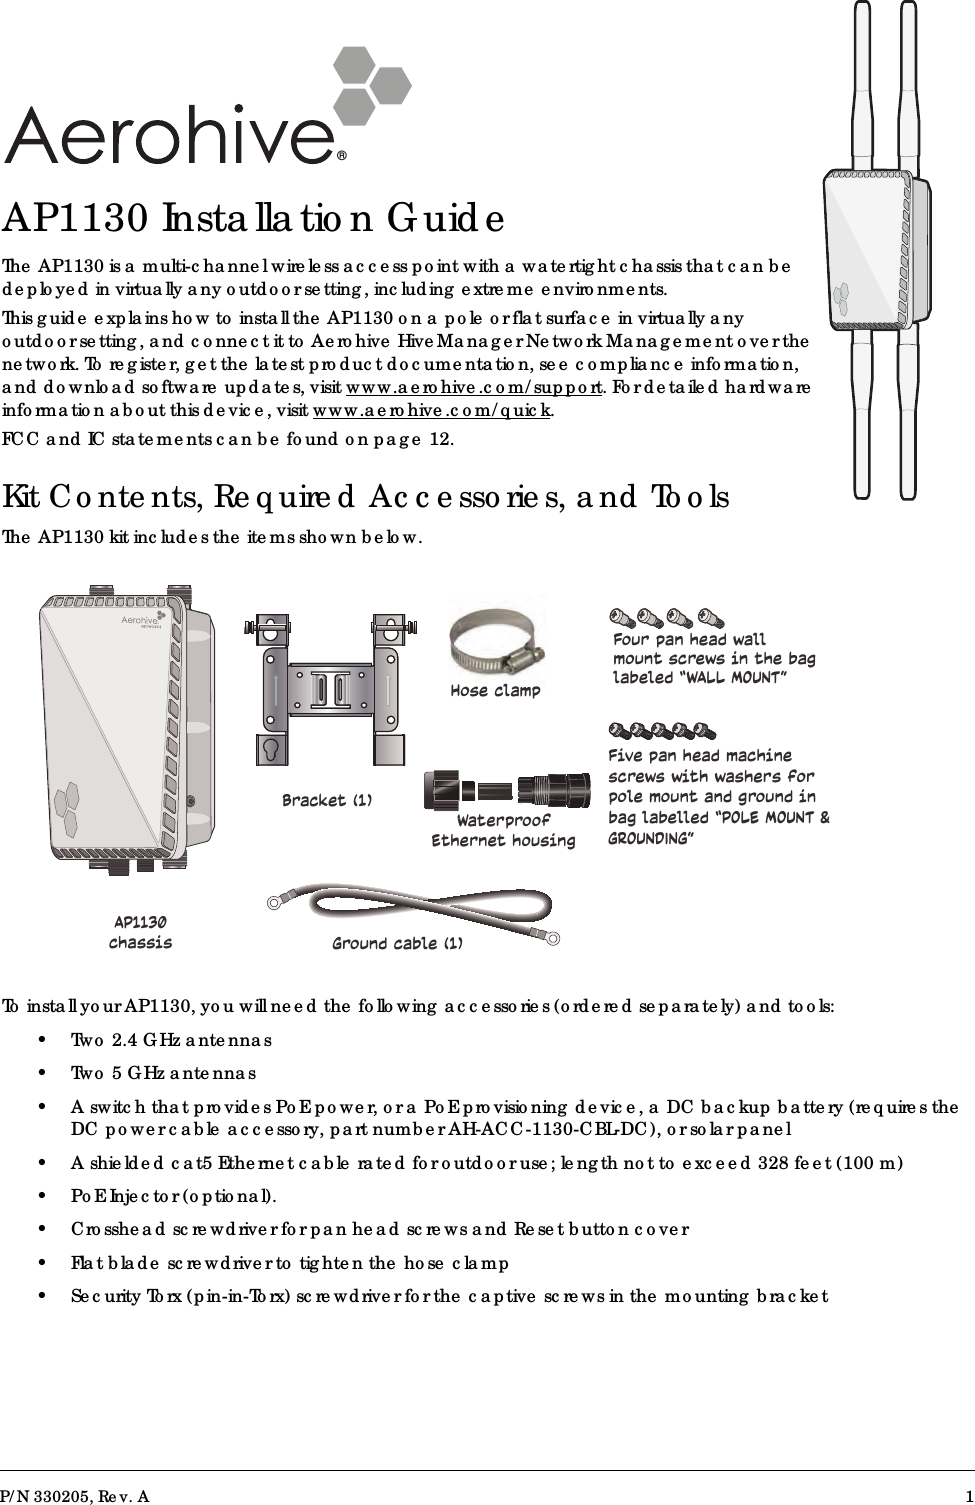 P/N 330205, Rev. A 1®AP1130 Installation GuideThe AP1130 is a multi-channel wireless access point with a watertight chassis that can be deployed in virtually any outdoor setting, including extreme environments. This guide explains how to install the AP1130 on a pole or flat surface in virtually any outdoor setting, and connect it to Aerohive HiveManager Network Management over the network. To register, get the latest product documentation, see compliance information, and download software updates, visit www.aerohive.com/support. For detailed hardware information about this device, visit www.aerohive.com/quick.FCC and IC statements can be found on page 12.Kit Contents, Required Accessories, and ToolsThe AP1130 kit includes the items shown below.To install your AP1130, you will need the following accessories (ordered separately) and tools:• Two 2.4 GHz antennas•Two 5 GHz antennas • A switch that provides PoE power, or a PoE provisioning device, a DC backup battery (requires theDC power cable accessory, part number AH-ACC-1130-CBL-DC), or solar panel• A shielded cat5 Ethernet cable rated for outdoor use; length not to exceed 328 feet (100 m)• PoE Injector (optional).• Crosshead screwdriver for pan head screws and Reset button cover• Flat blade screwdriver to tighten the hose clamp• Security Torx (pin-in-Torx) screwdriver for the captive screws in the mounting bracketBracket (1)AP1130 chassisFive pan head machine screws with washers for pole mount and ground in bag labelled “POLE MOUNT &amp; GROUNDING”Four pan head wall mount screws in the bag labeled “WALL MOUNT”Hose clampGround cable (1)Waterproof Ethernet housing